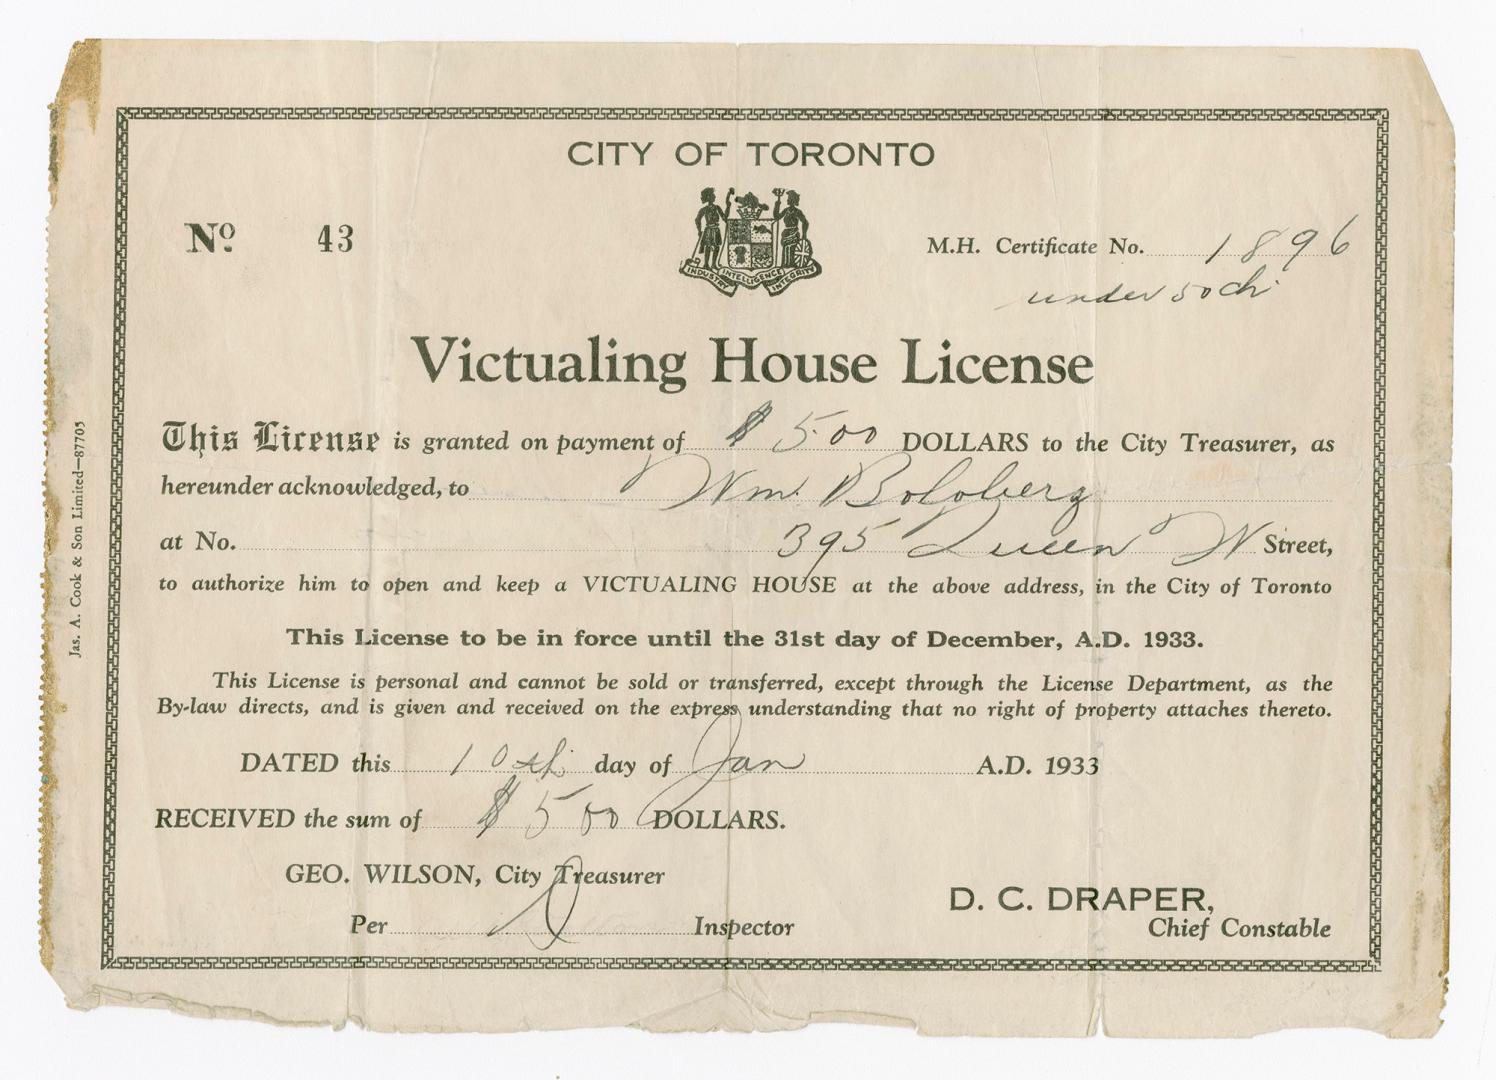 Victualing house license